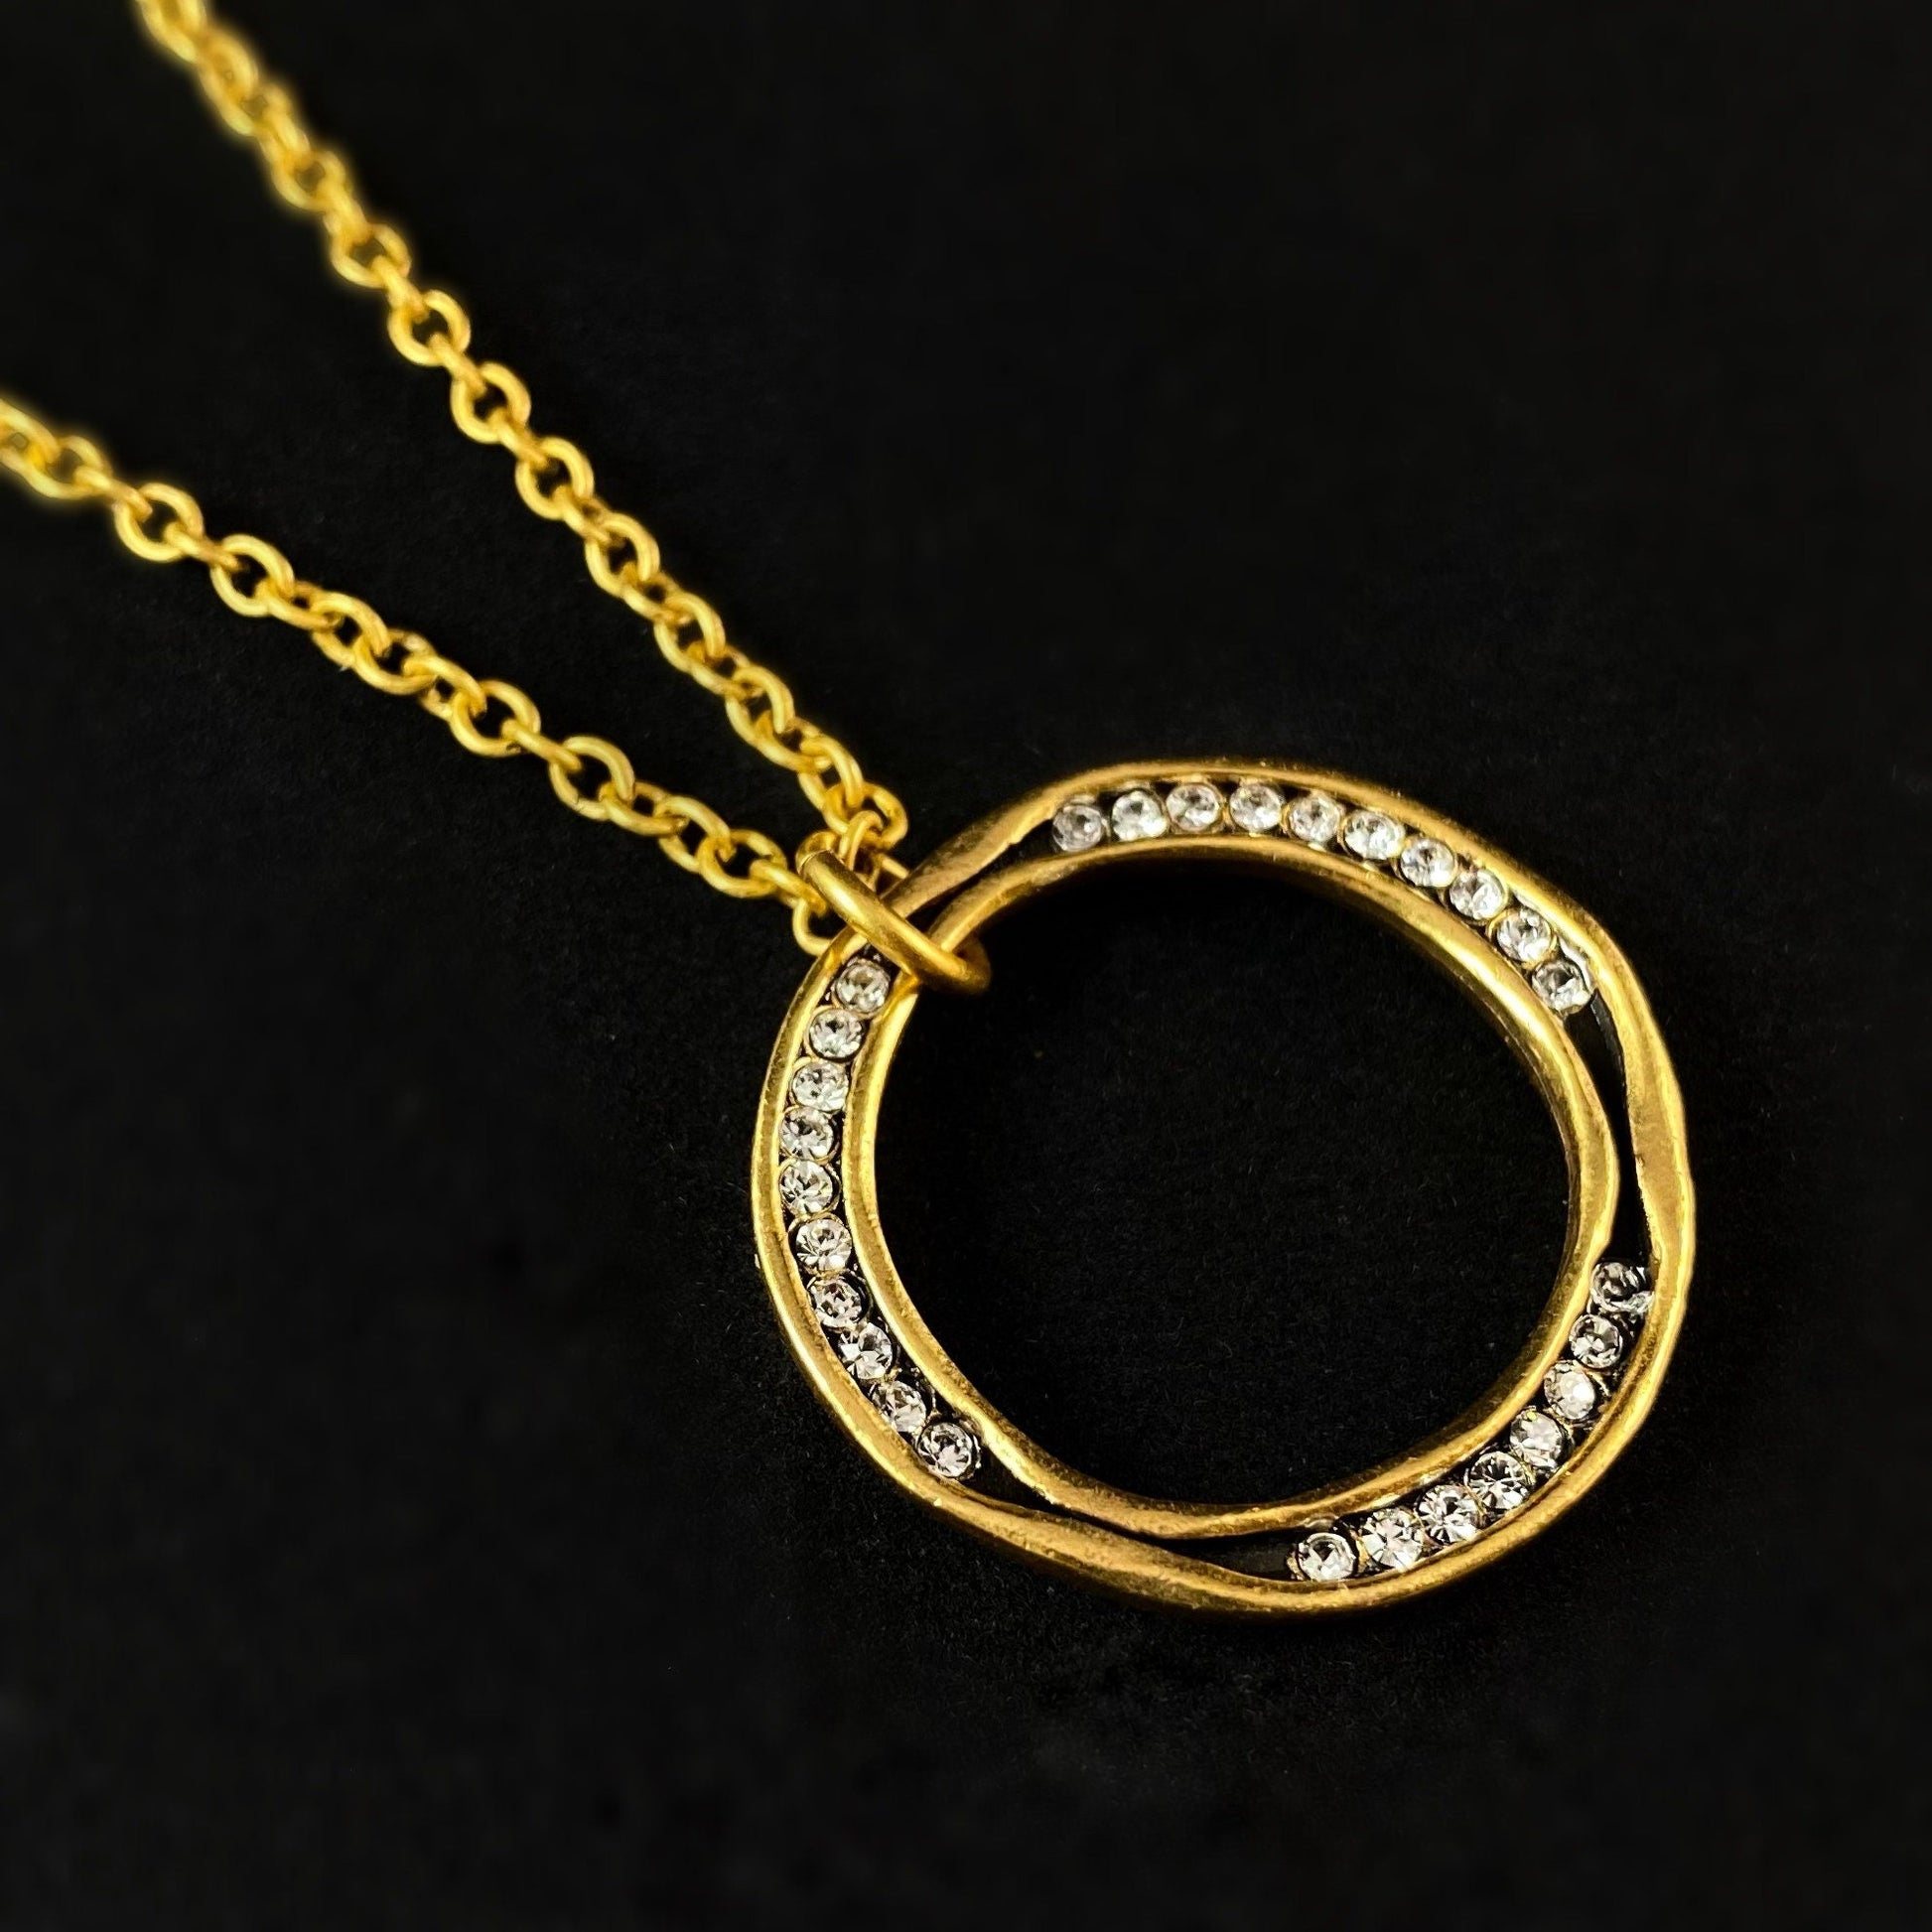 Handmade Round Gold Pendant Necklace with Crystals, Made in USA